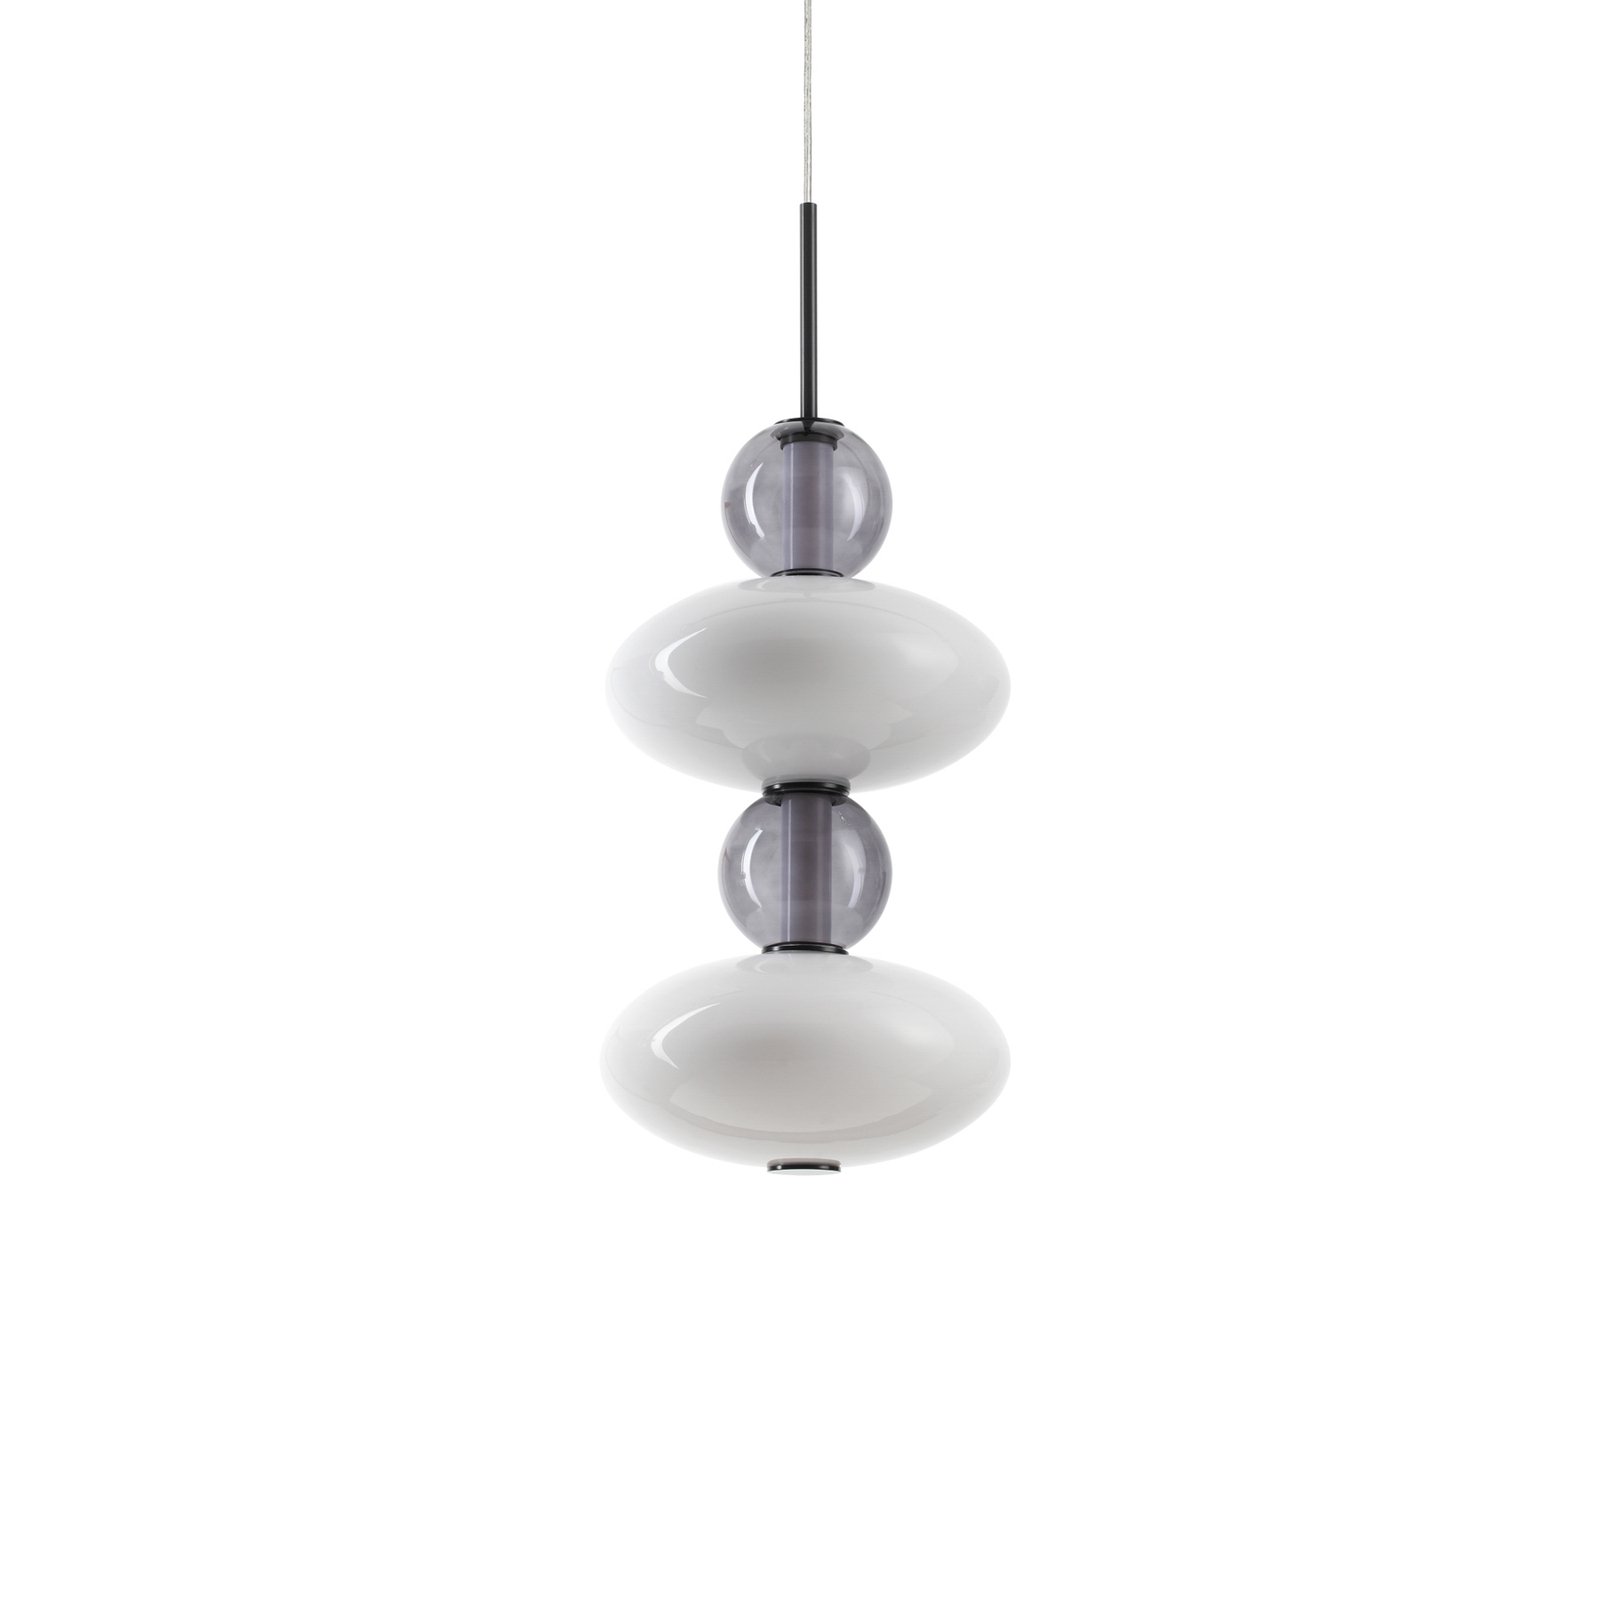 Ideal Lux hanglamp Lumiere-2, opaal/grijs glas